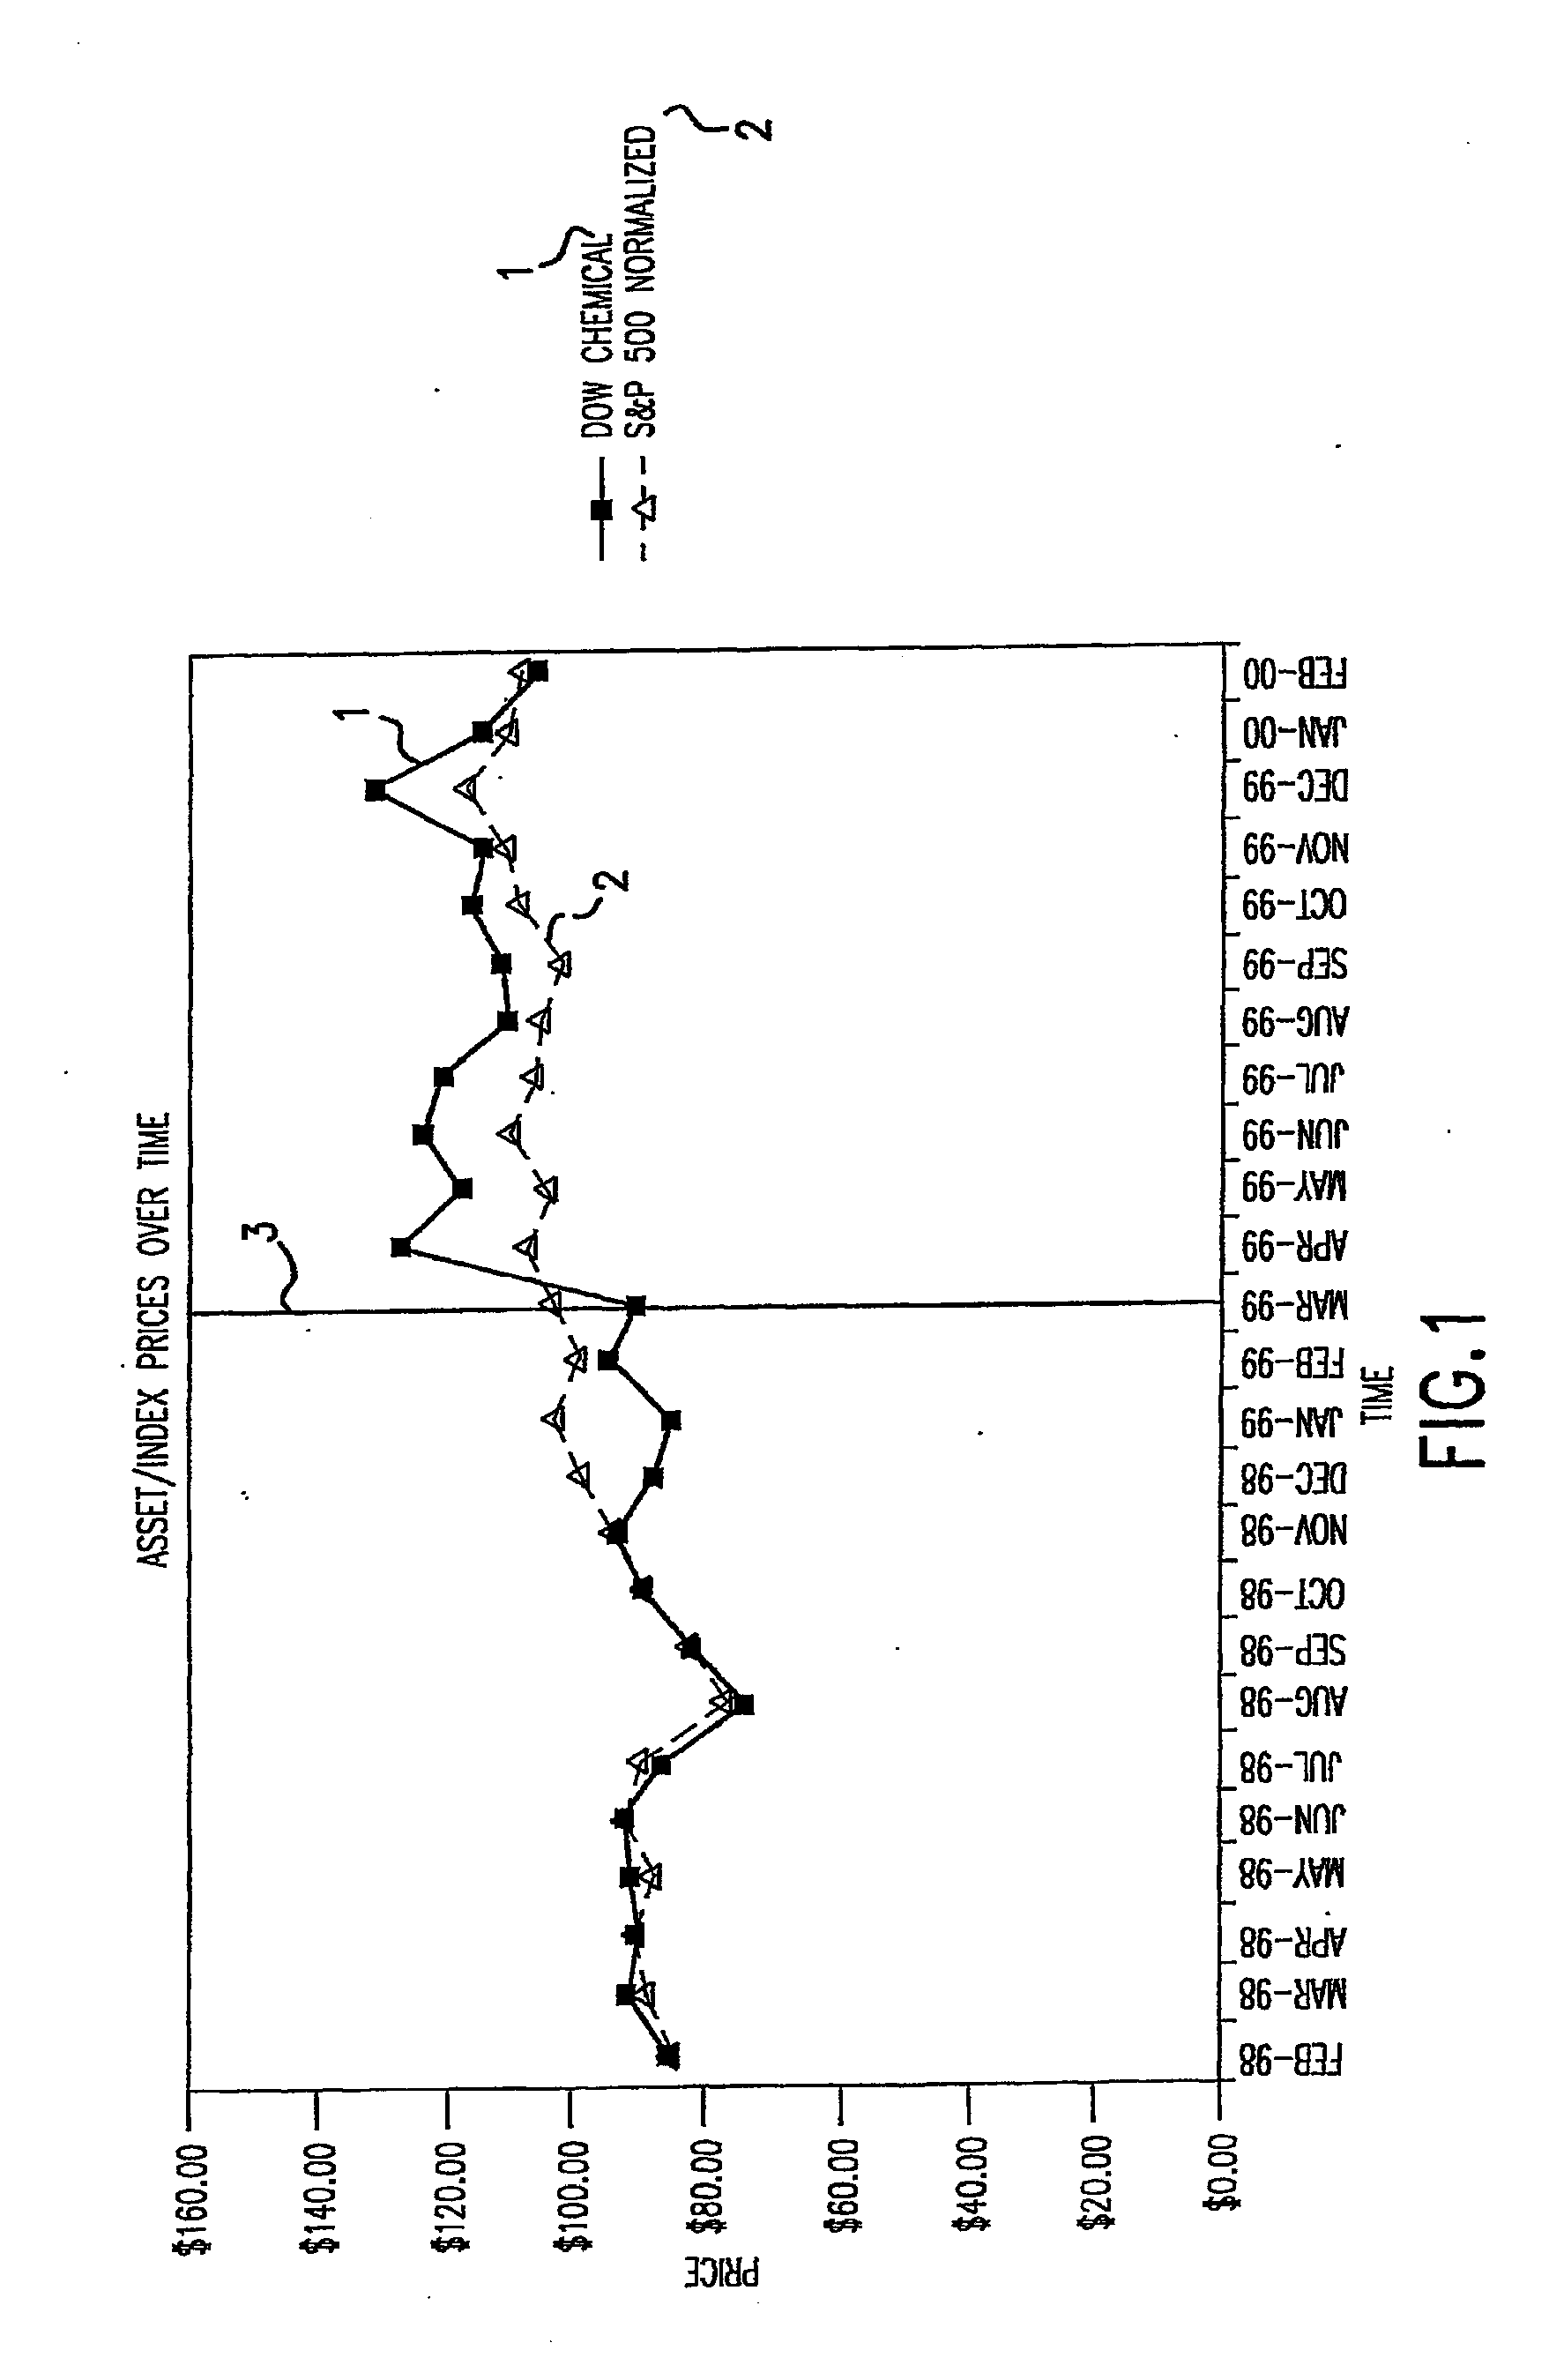 Method and apparatus for analyzing individual and comparative returns on assets